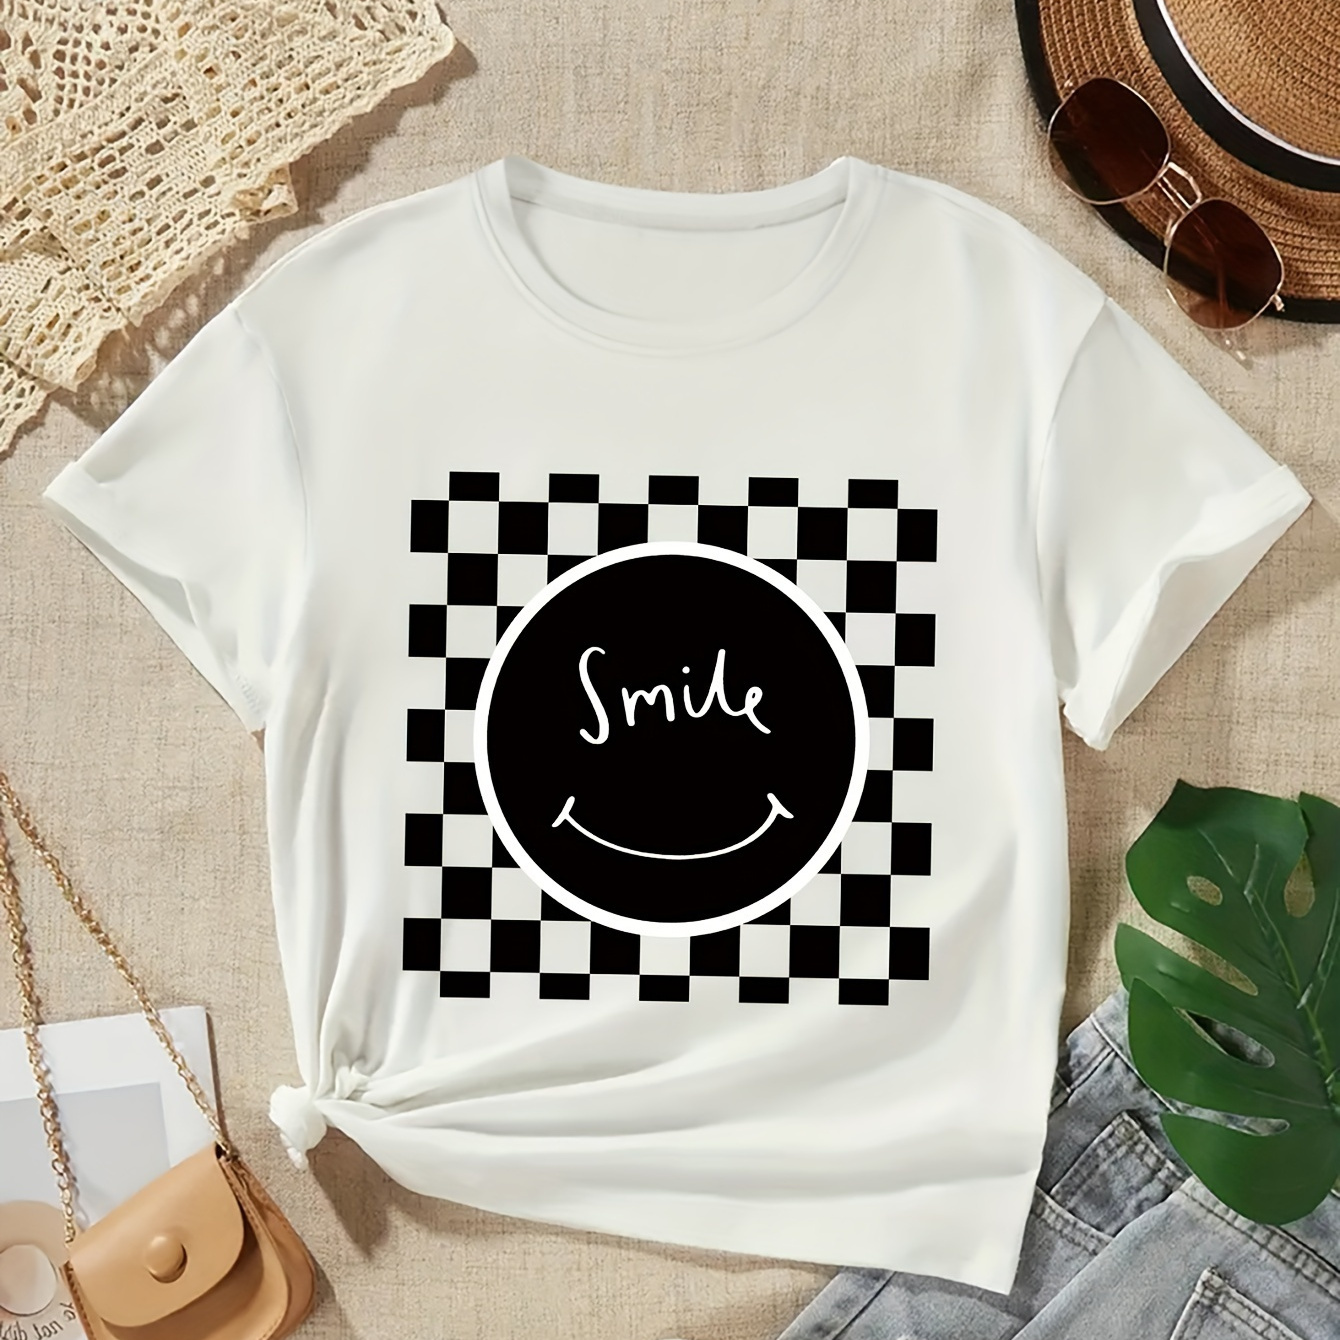 

Smile Graphic Print, Girls' Casual Crew Neck Short Sleeve T-shirt, Comfy Top Clothes For Spring And Summer For Outdoor Activities